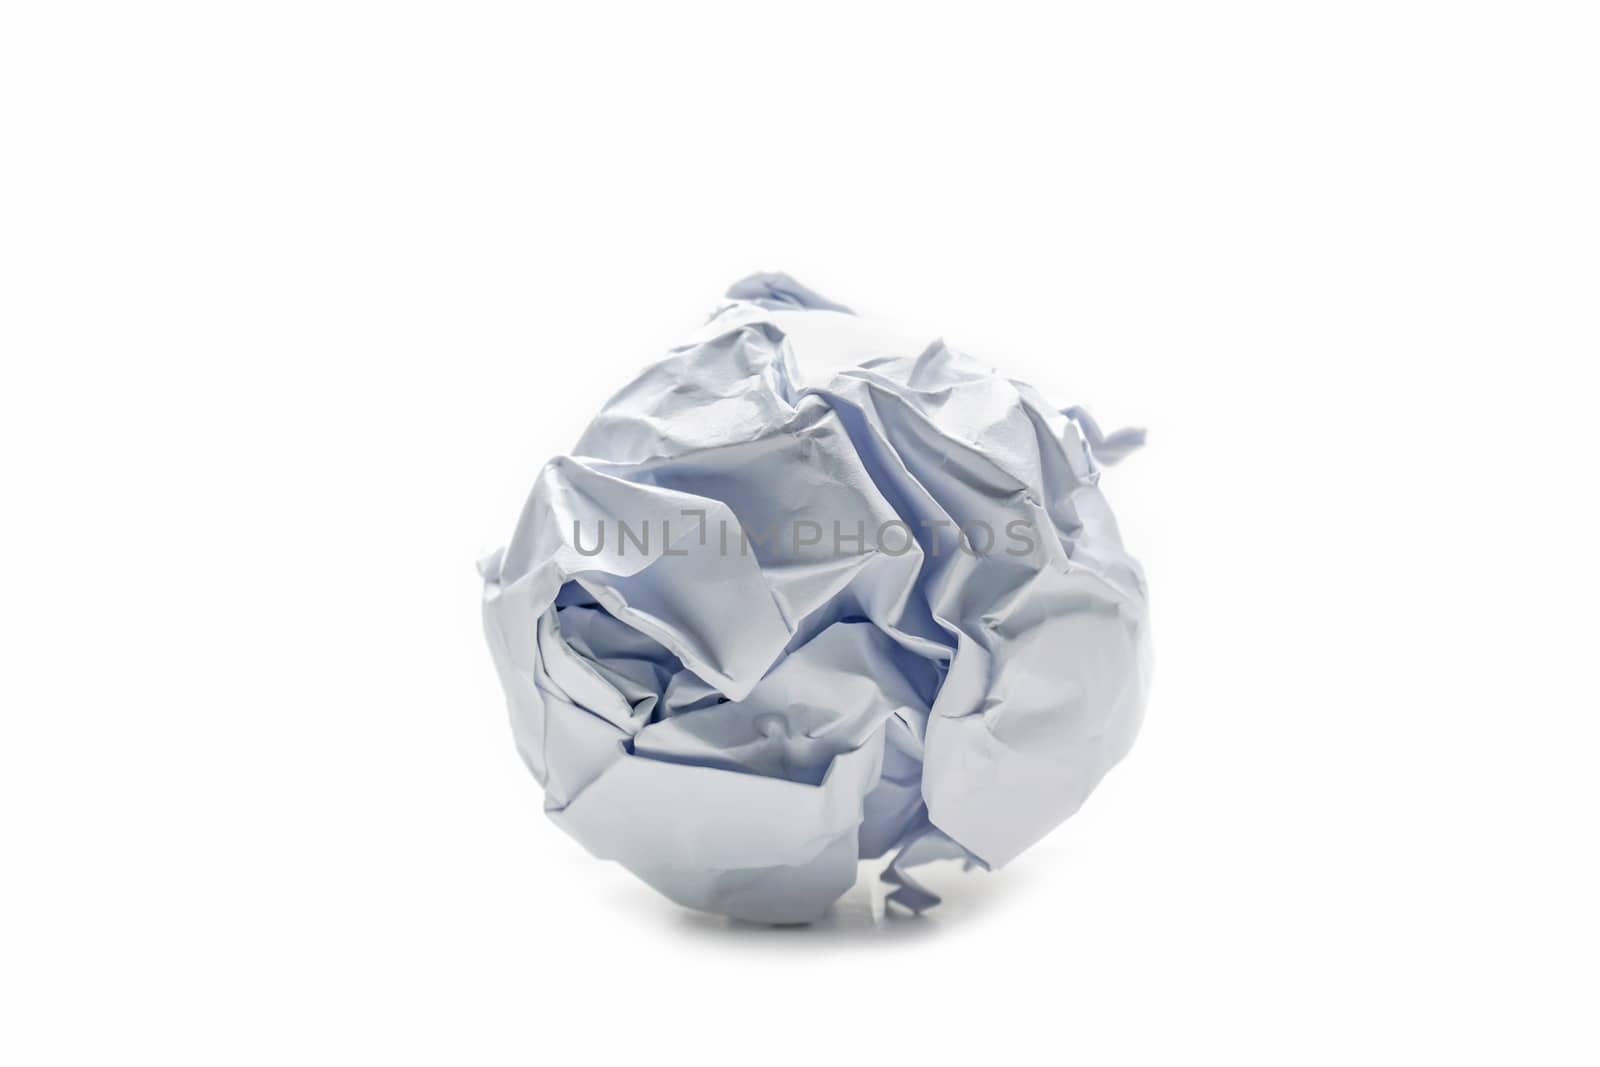 Paper ball object by nopparats